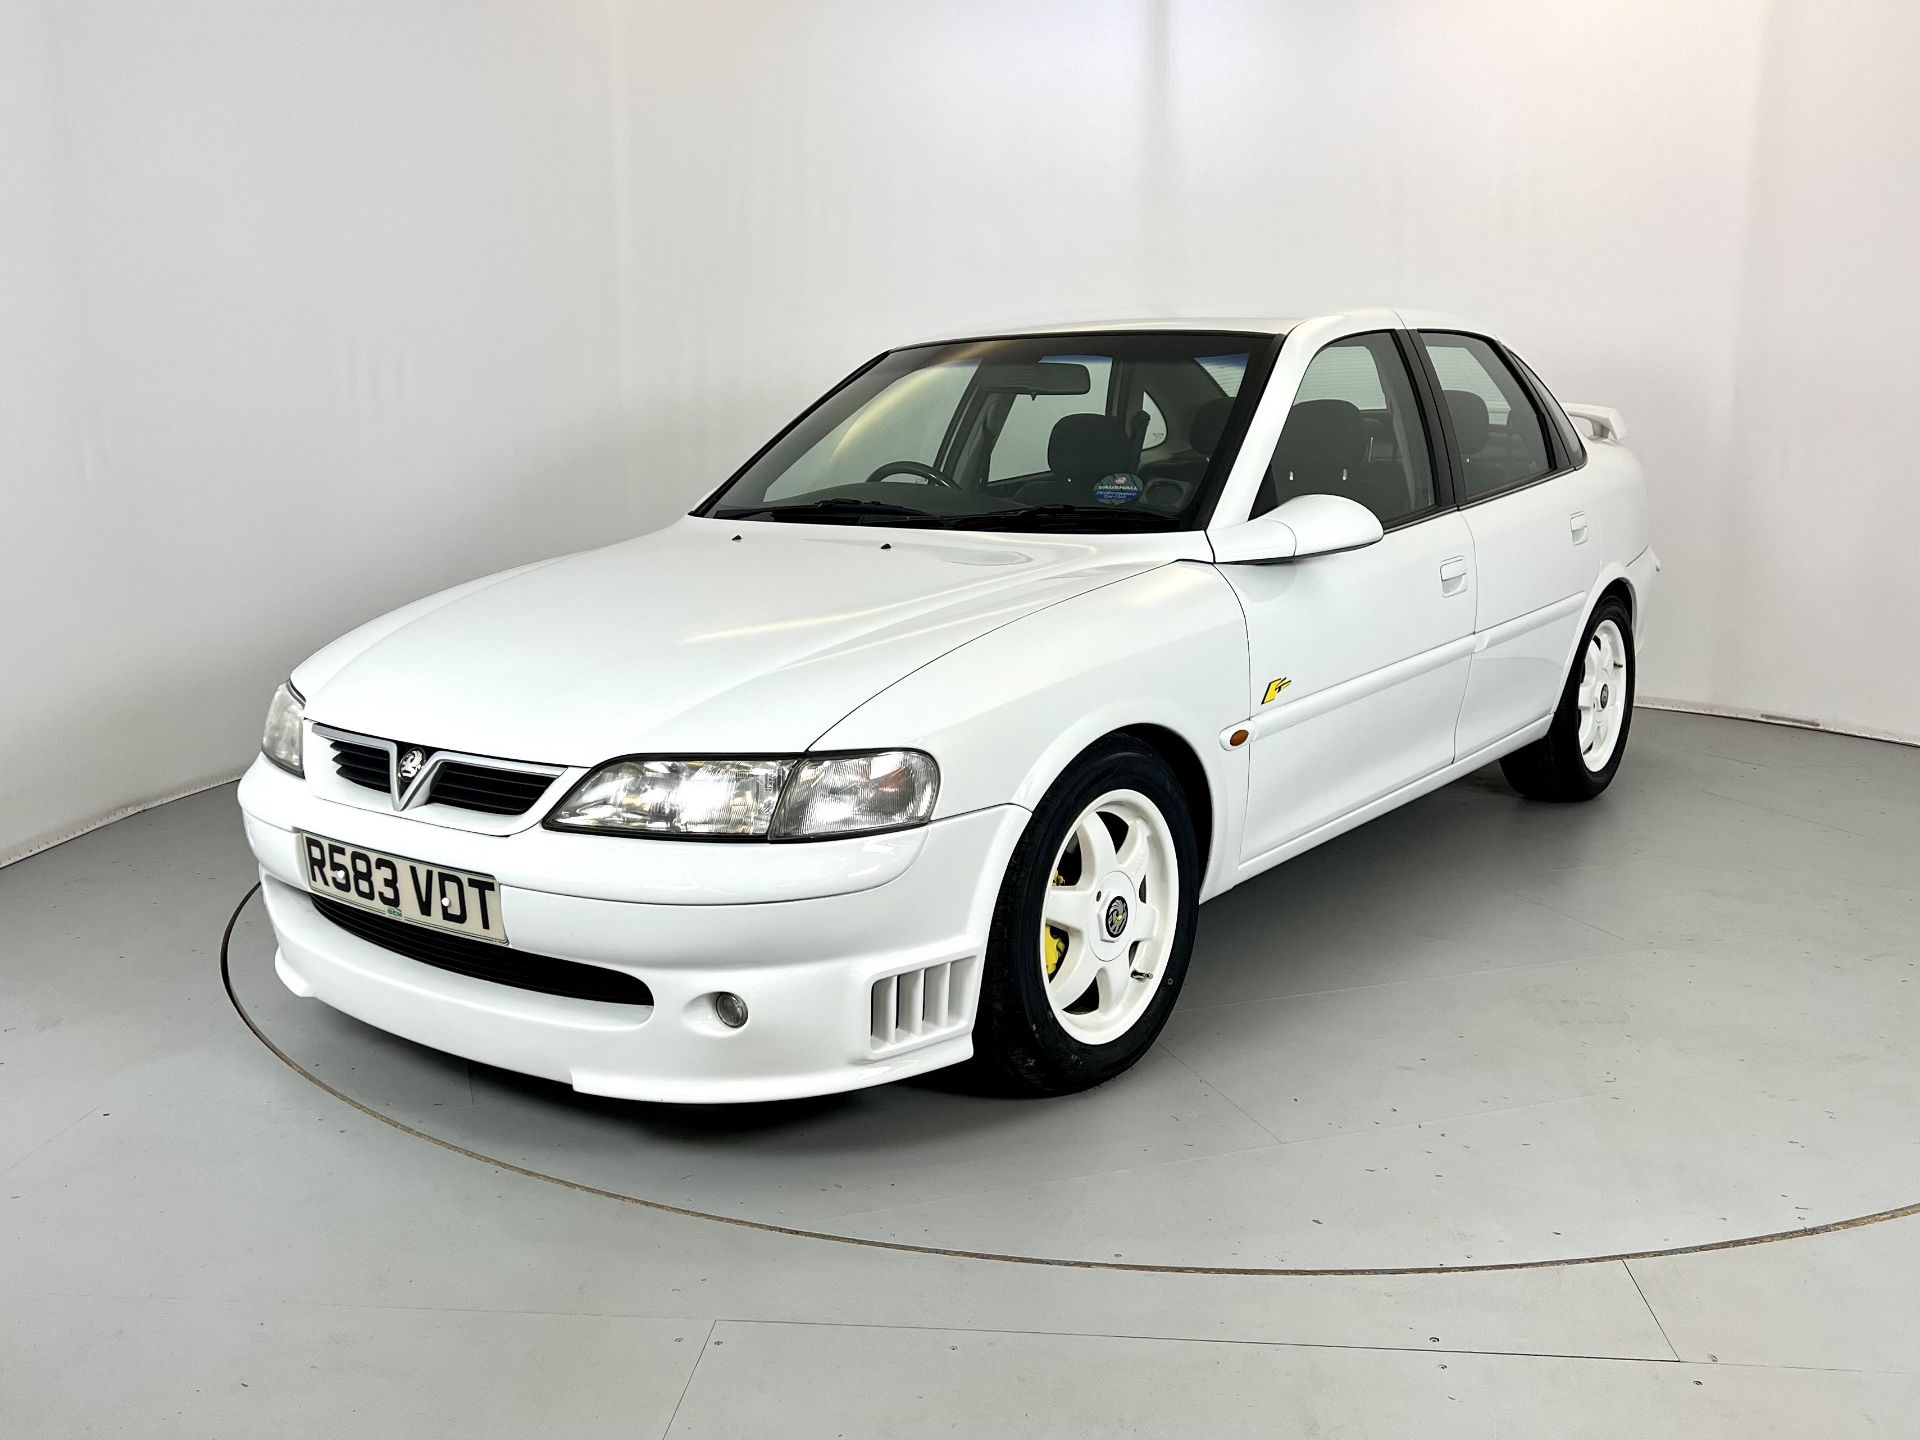 Vauxhall Vectra Supertouring - Image 3 of 36